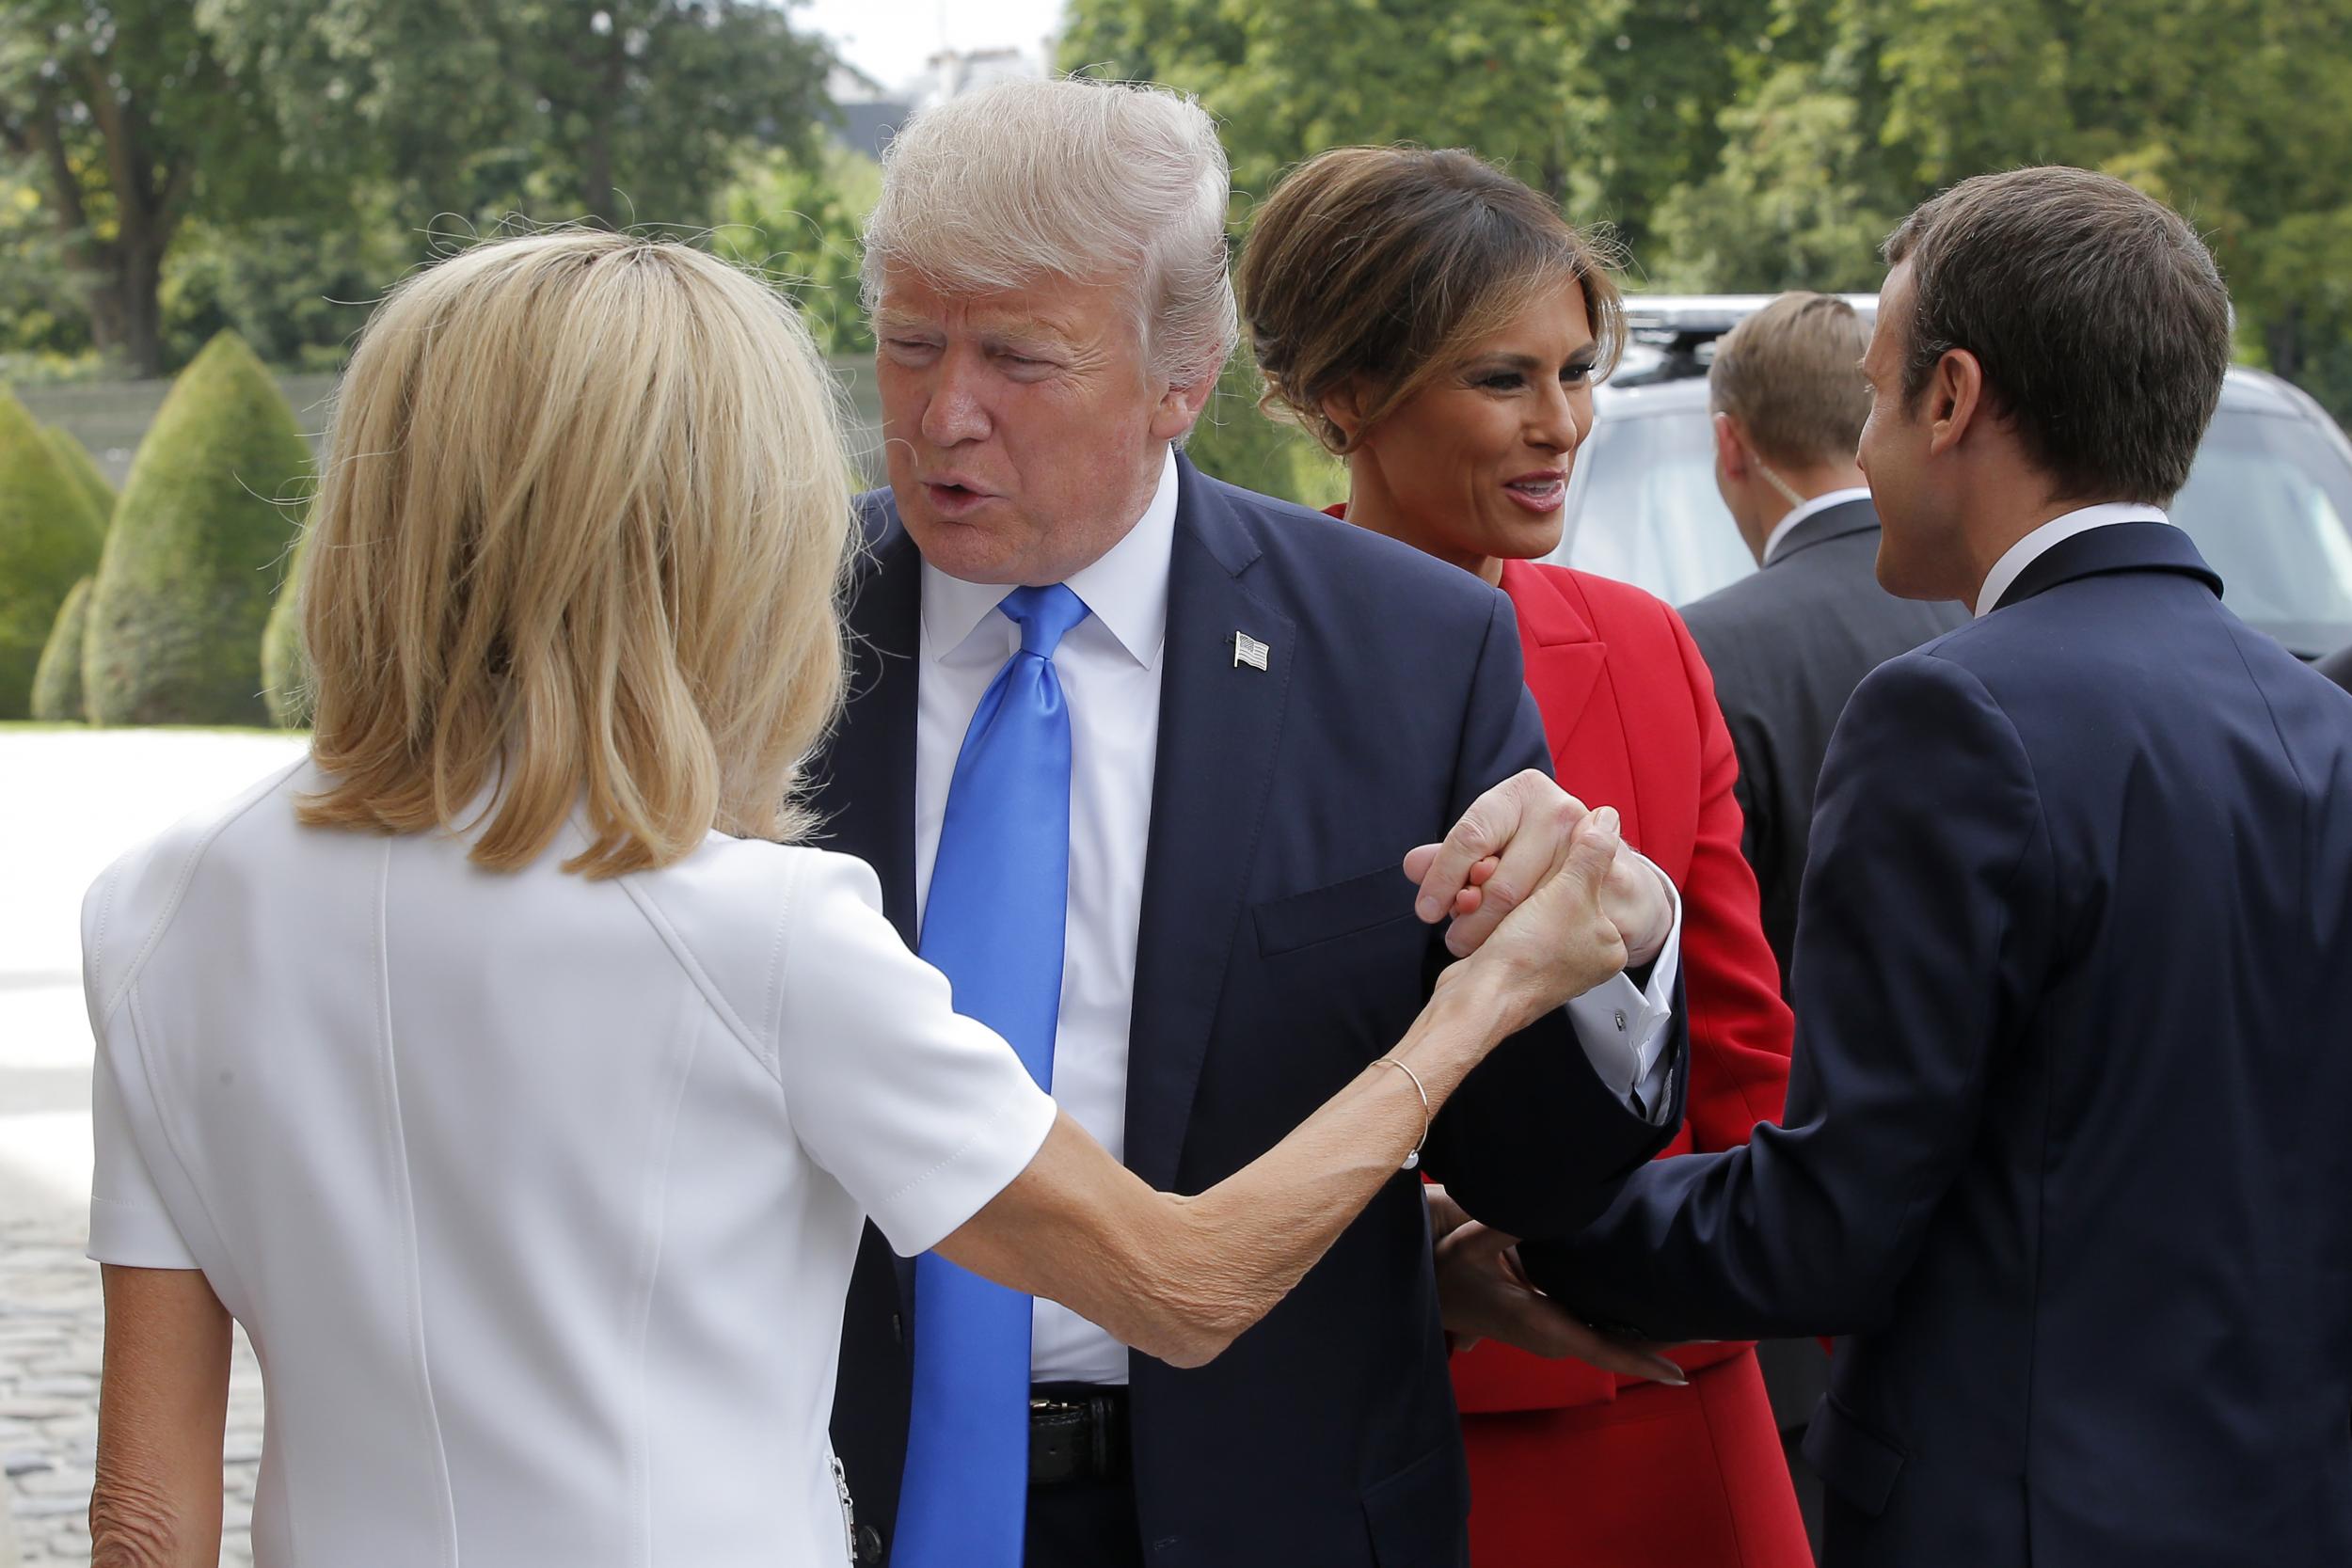 The US President caused offence in France by saying Brigitte Macron was ‘in good shape’